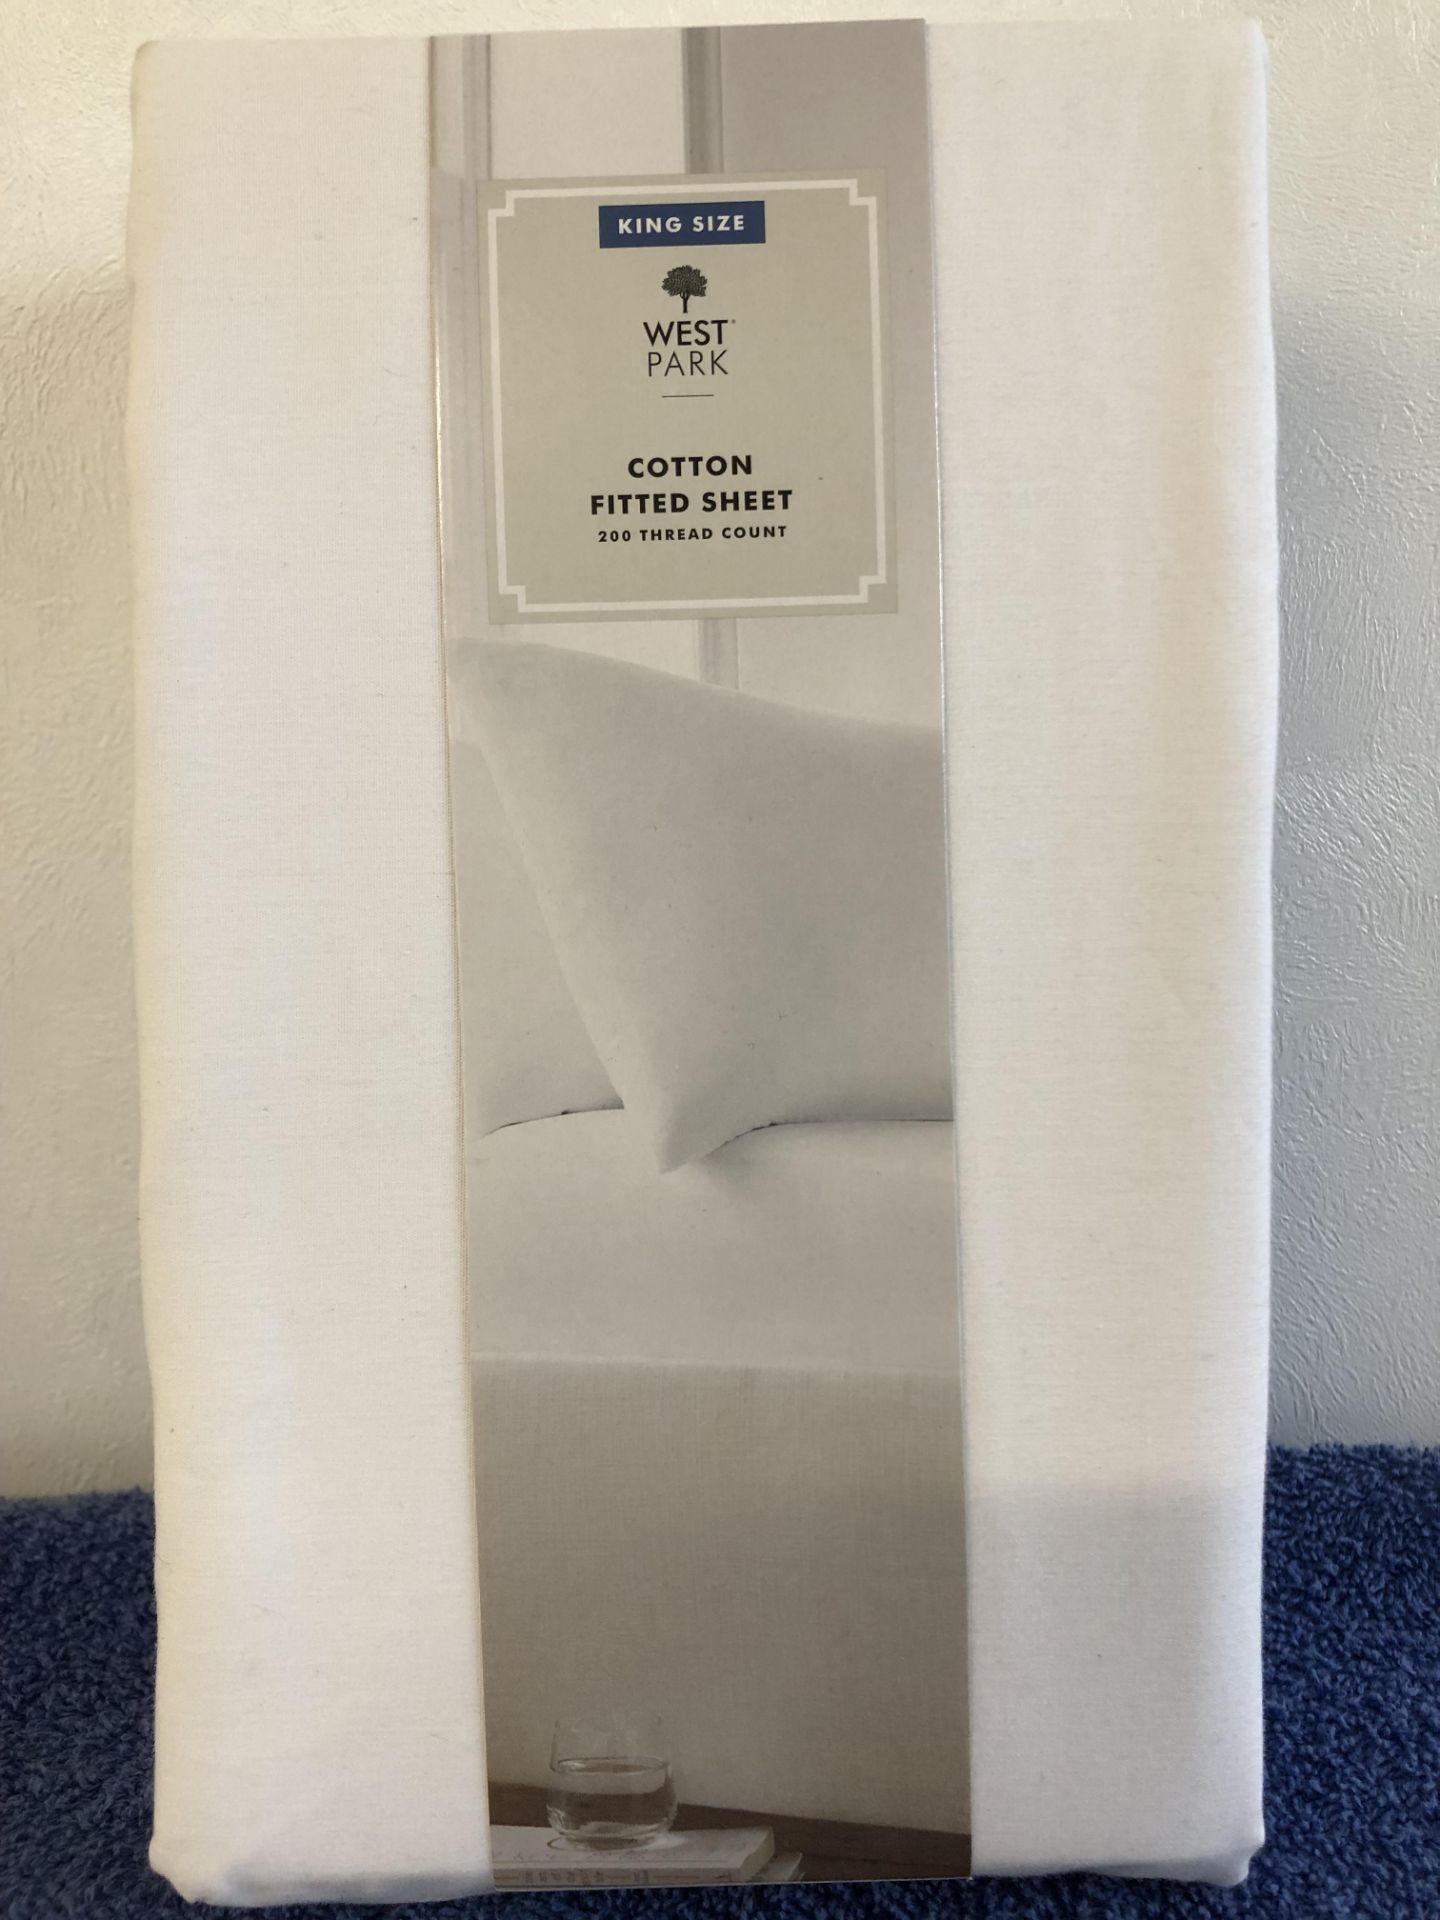 6 KING SIZE WHITE COTTON 200 THREAD COUNT FITTED SHEETS 152 X 200 X 25CM BY WEST PARK RRP £18.